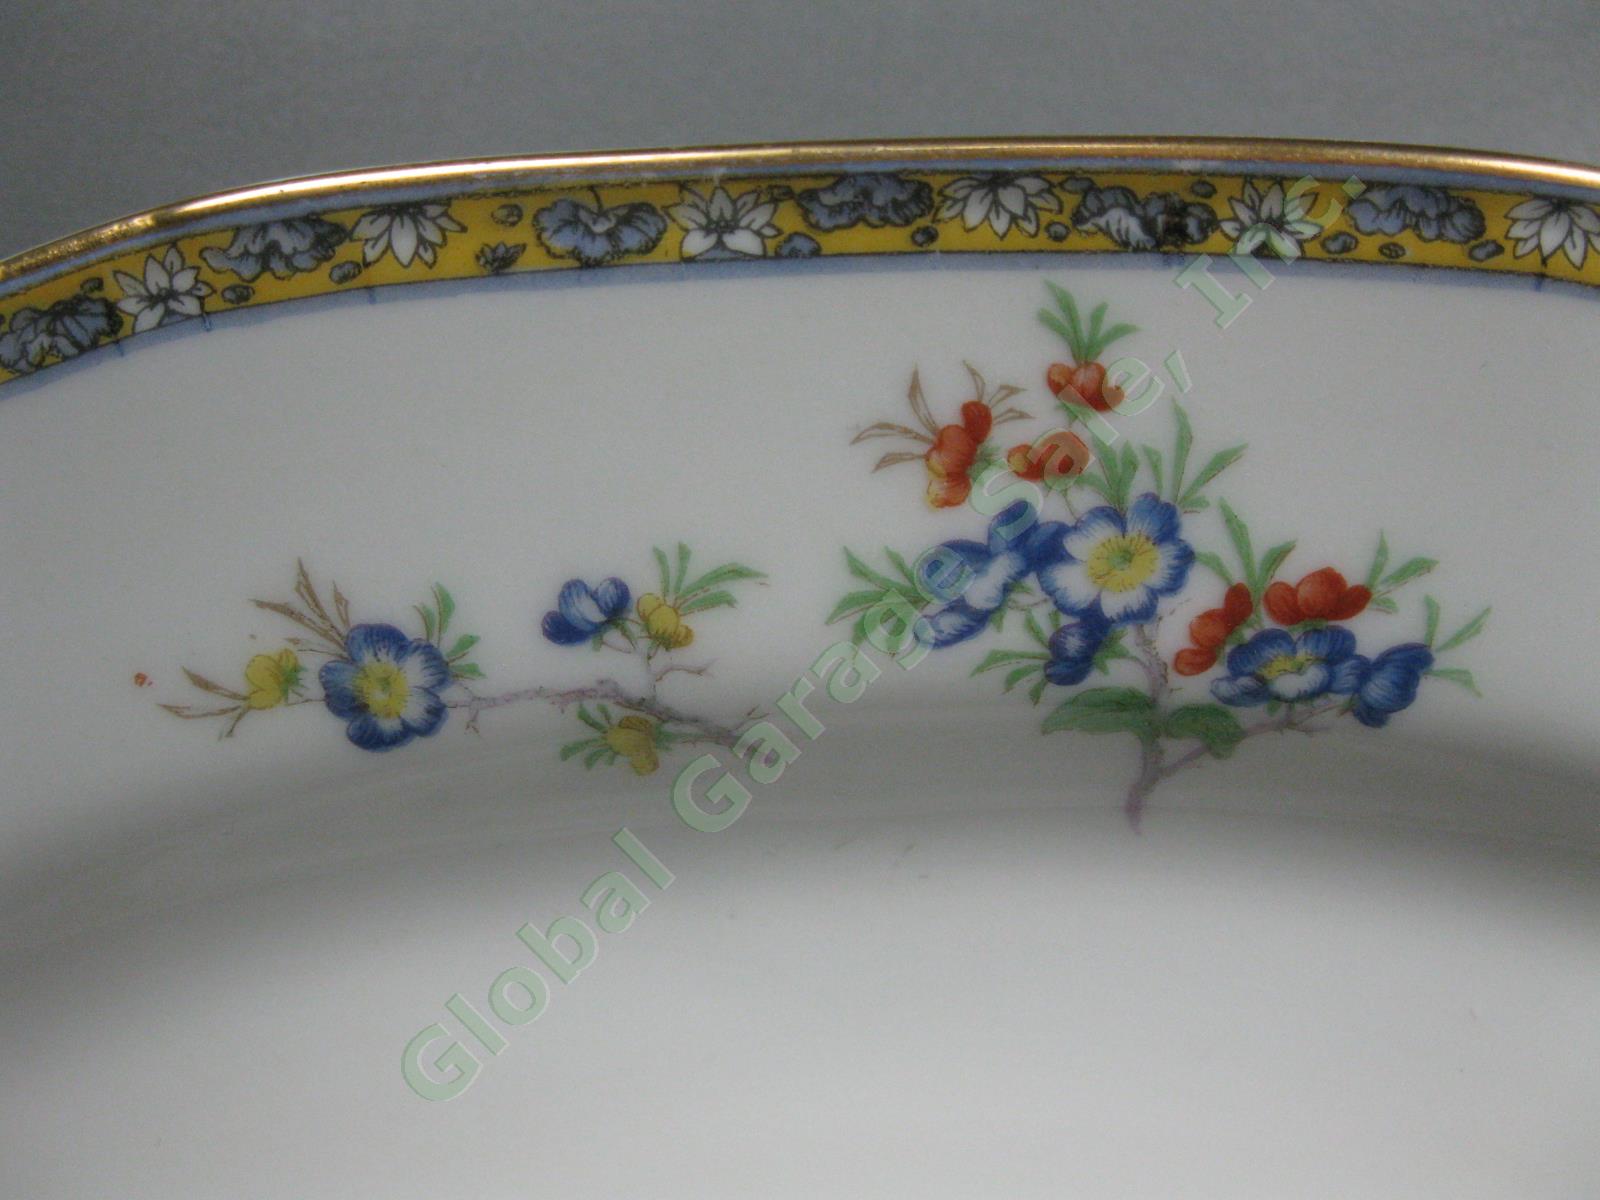 Theodore Haviland Montreux Mongolia 15" Large Oval Serving Platter Tray Limoges 2